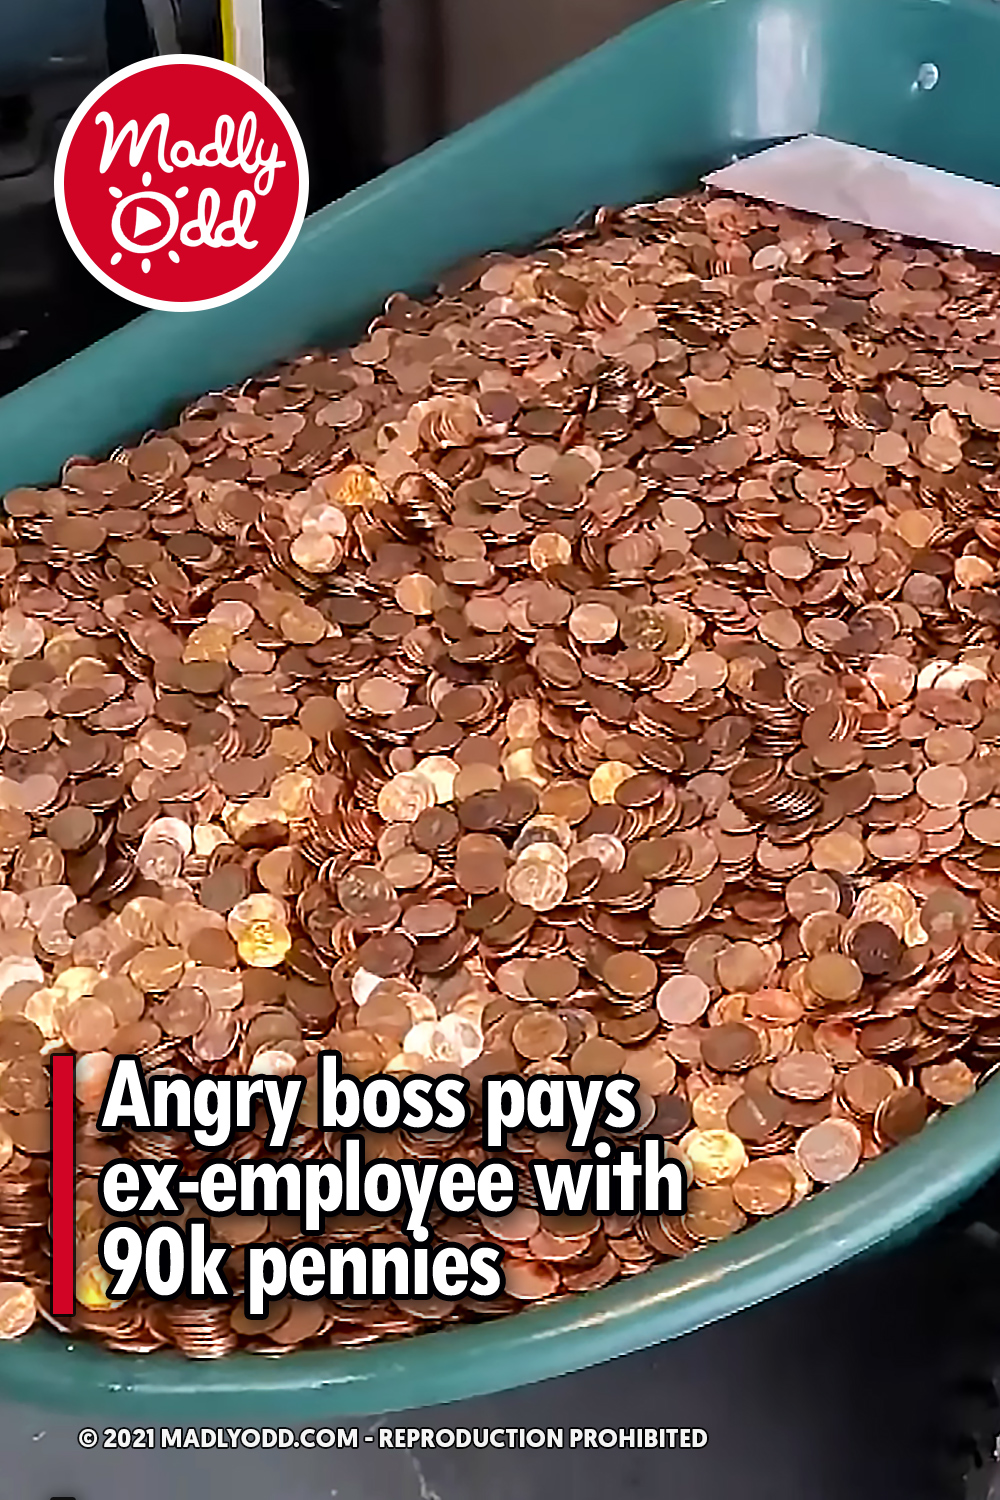 Angry boss pays ex-employee with 90k pennies